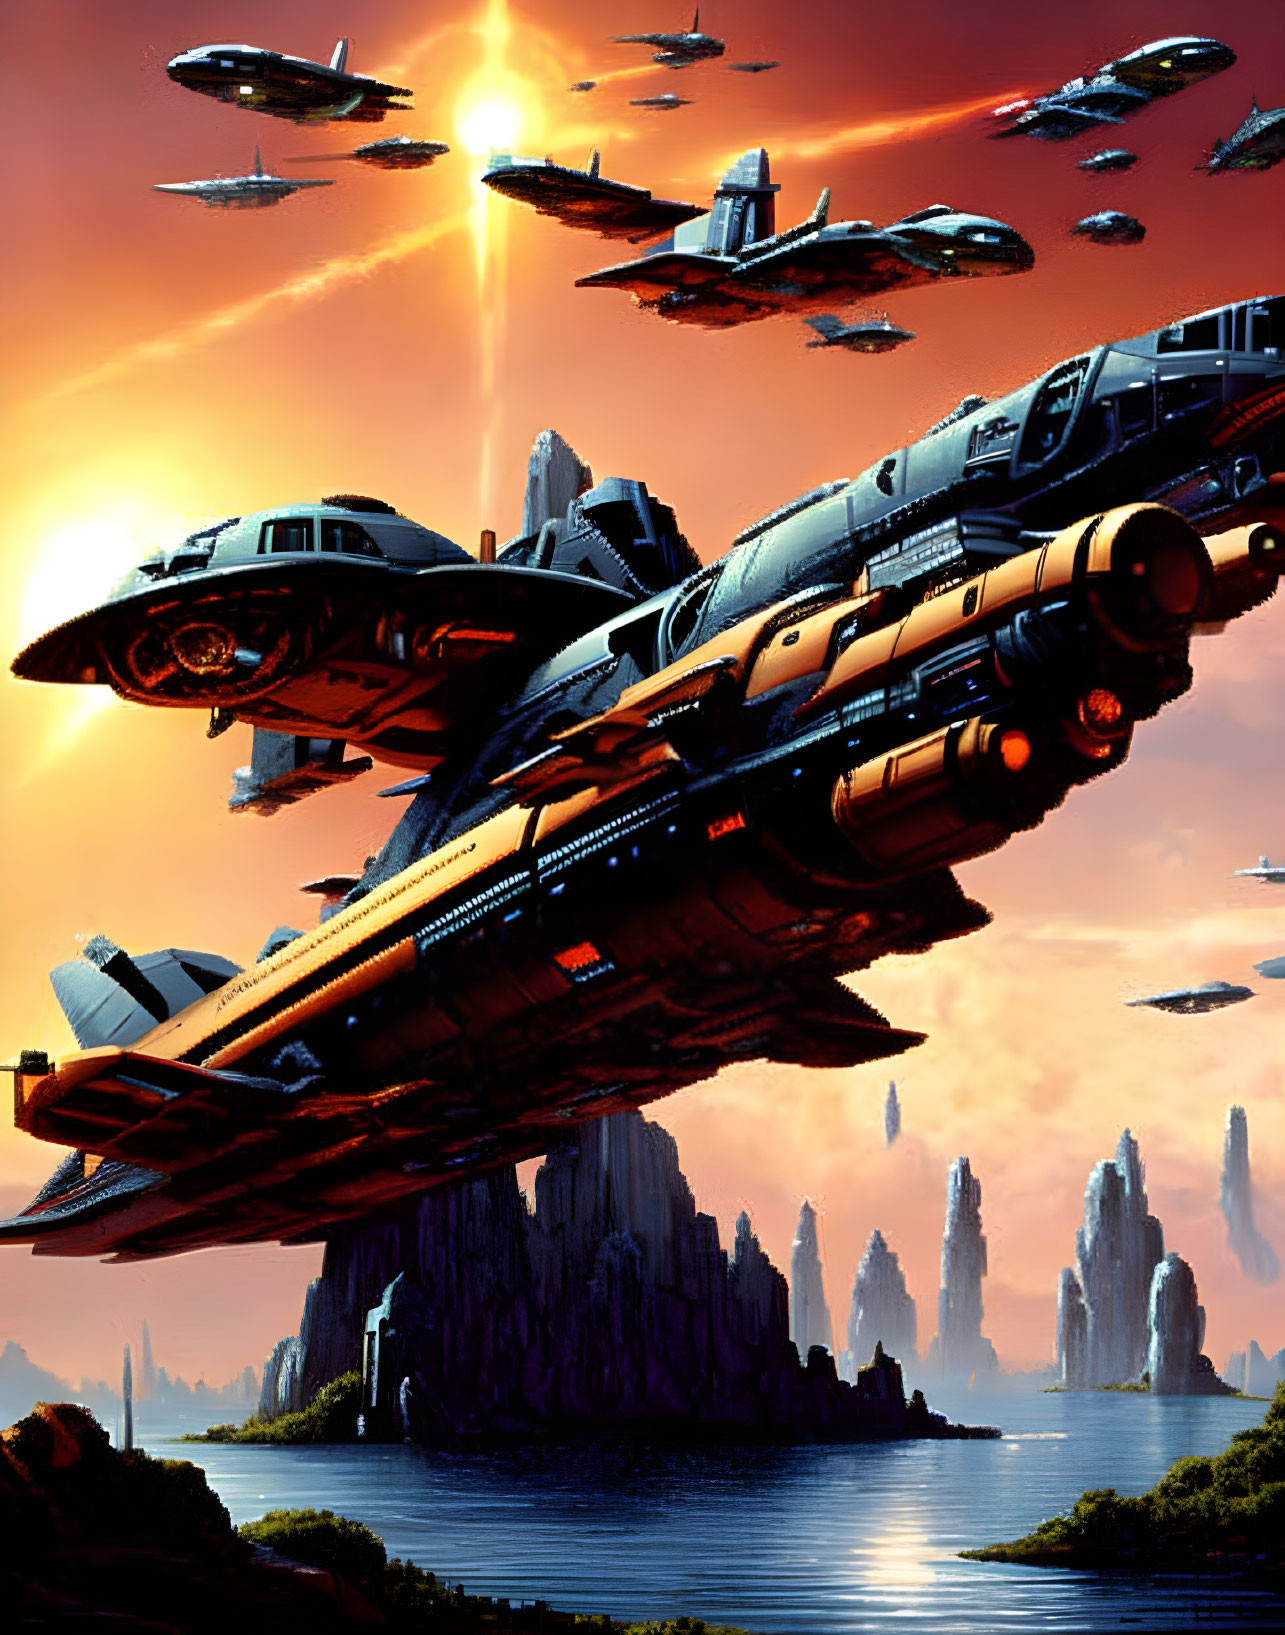 Futuristic spaceships over rocky alien landscape with spires and water body at sunset.